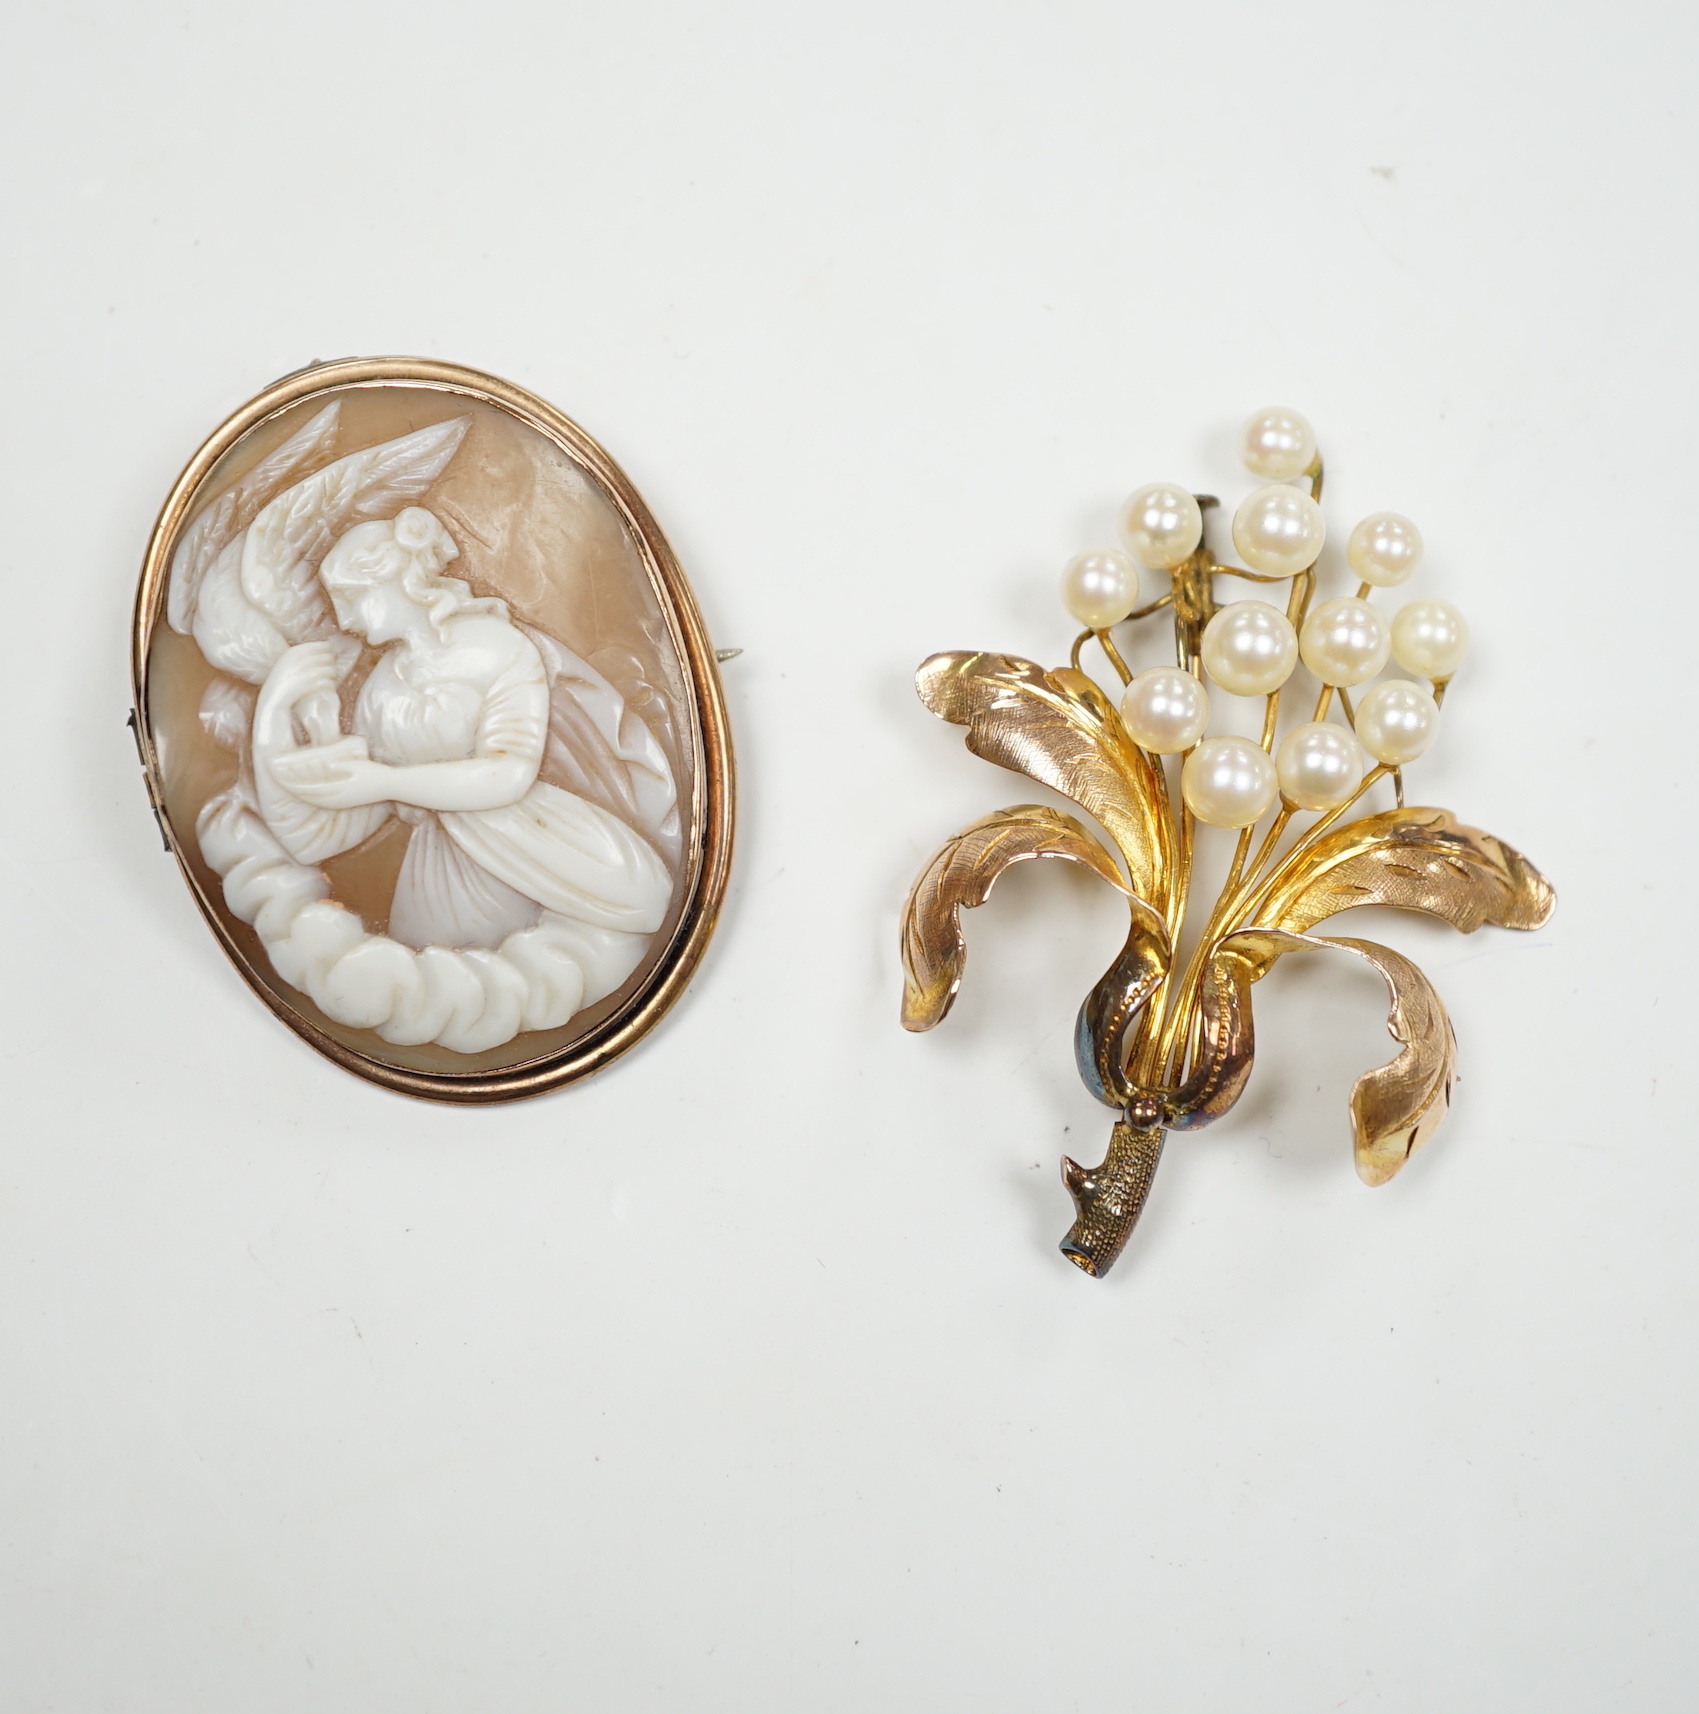 A 14K yellow metal and cultured pearl cluster set floral brooch, 52mm, gross weight 7 grams, together with a yellow metal mounted carved cameo shell brooch.